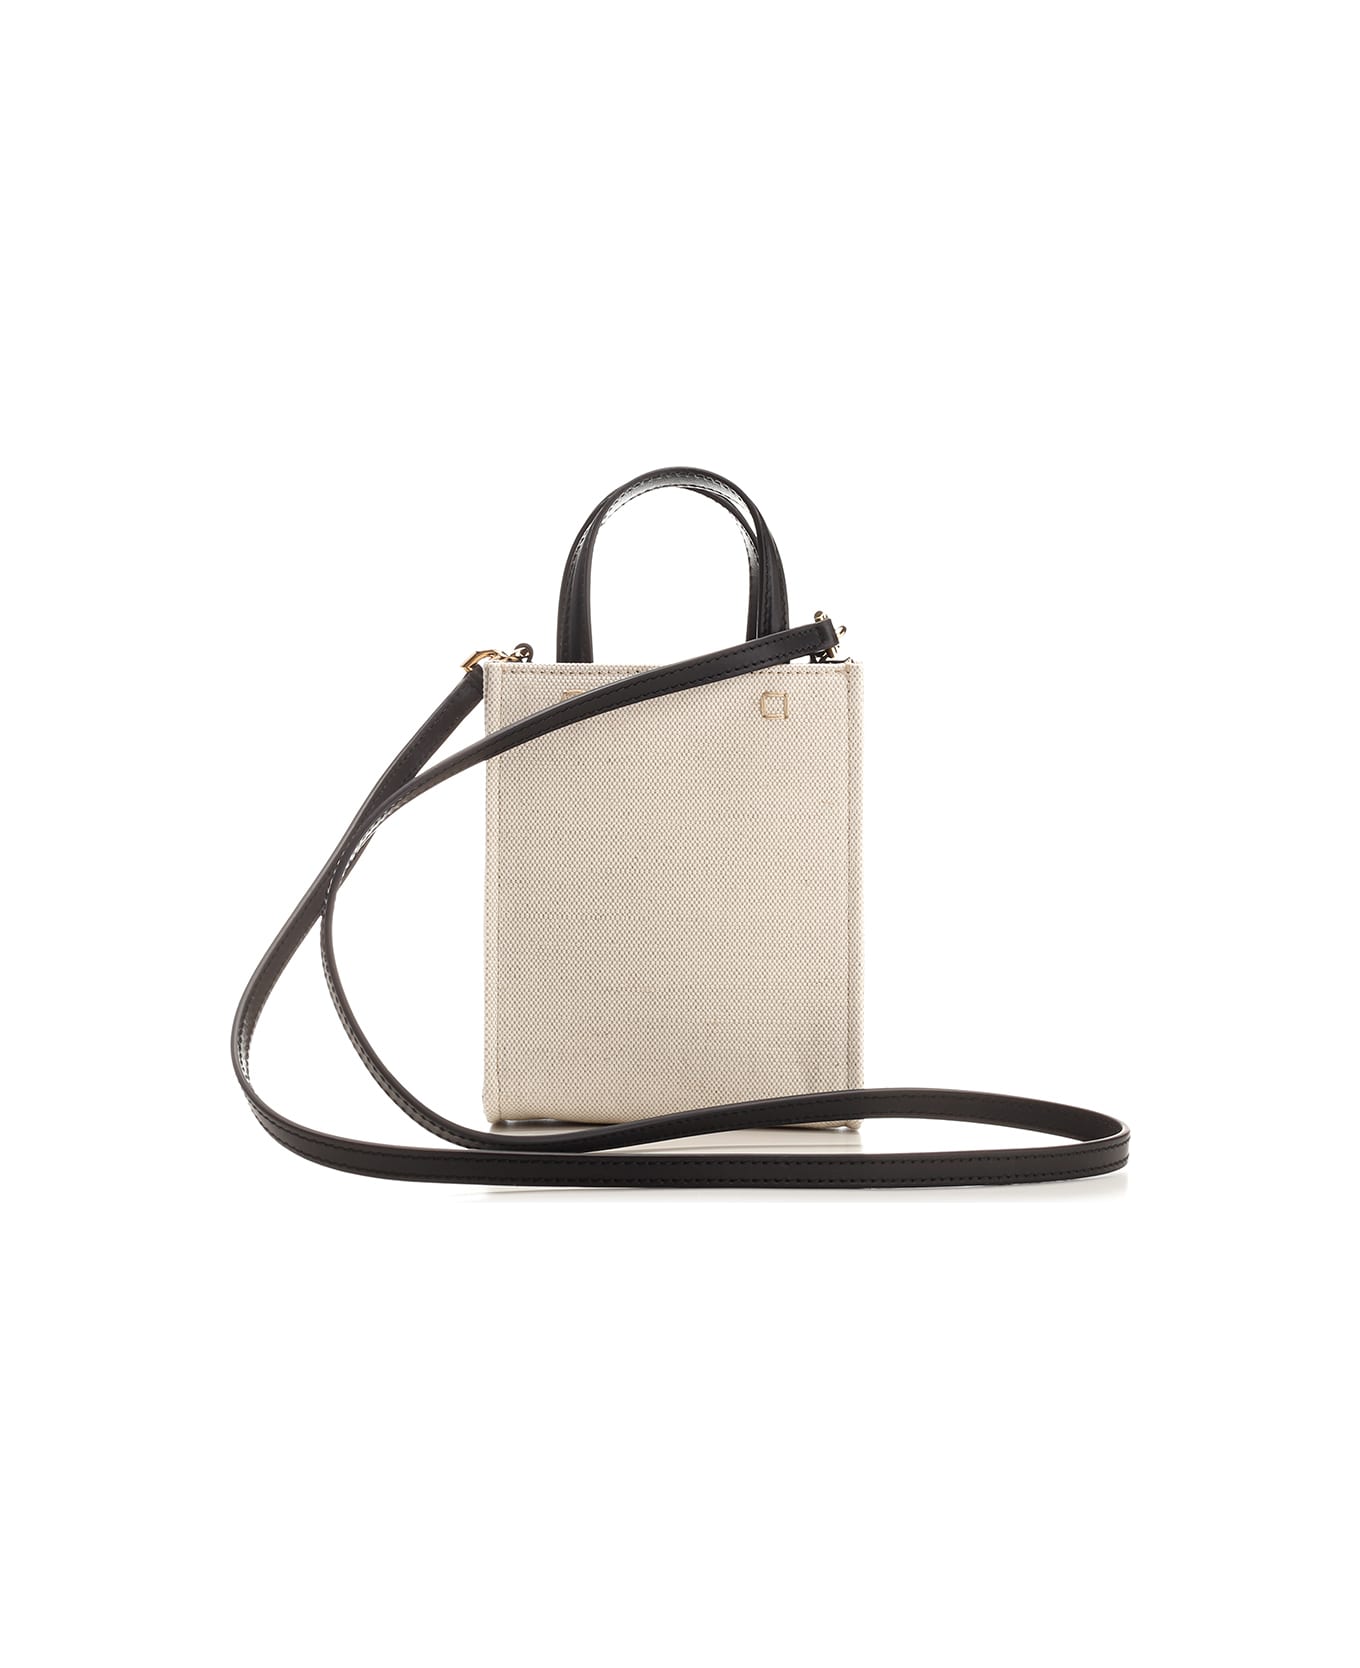 Givenchy 'g Tote' Mini Bag - Beige トートバッグ